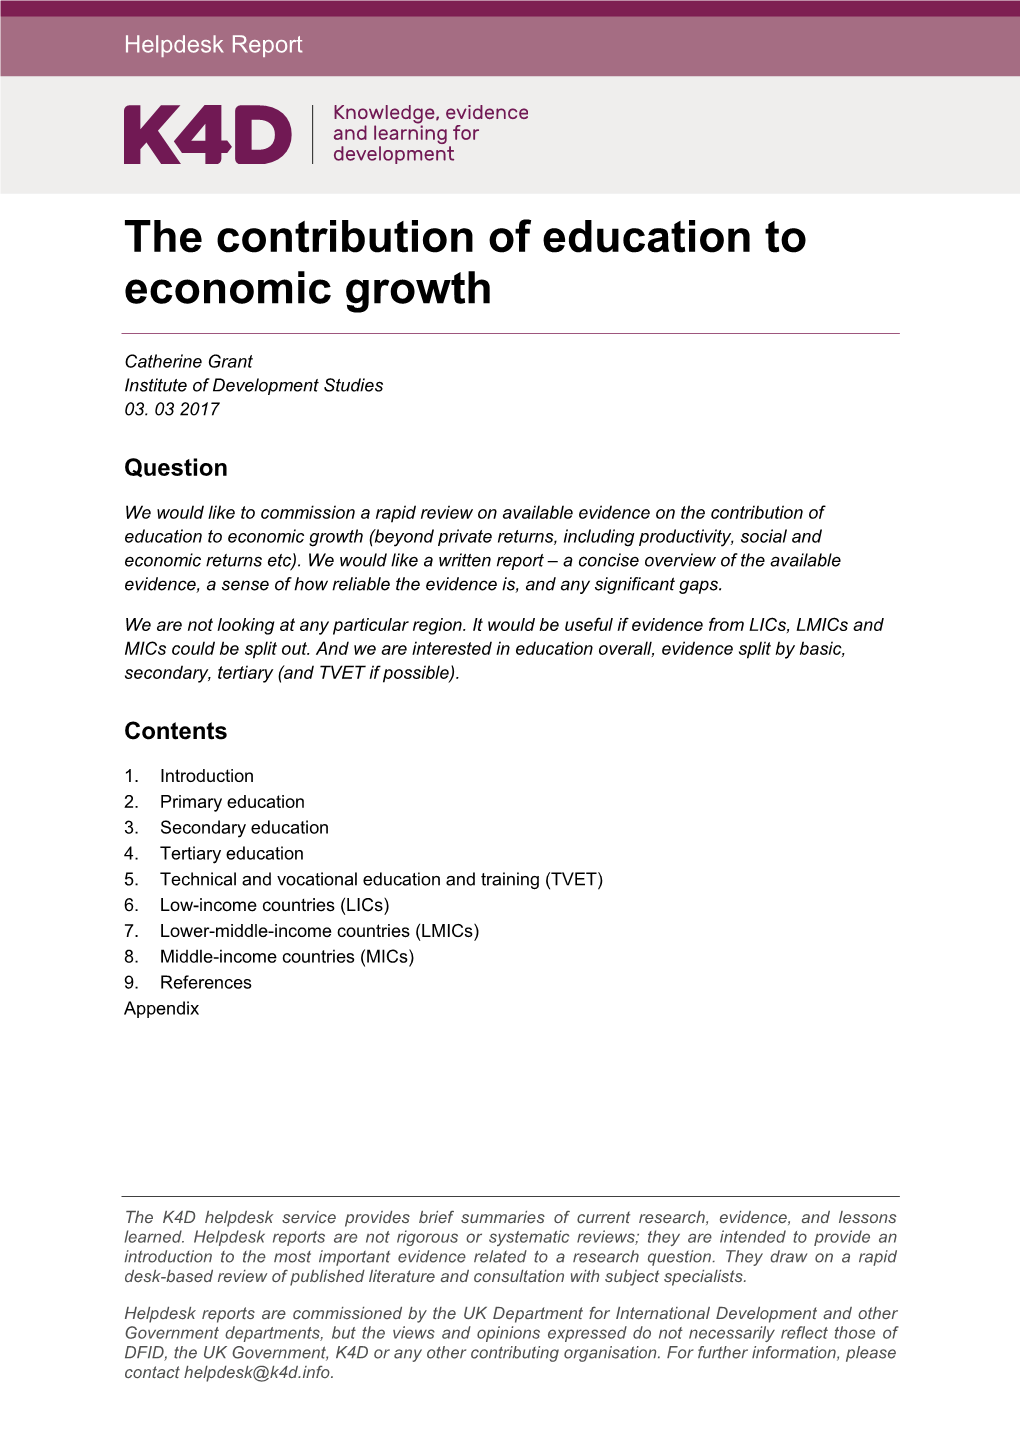 The Contribution of Education to Economic Growth